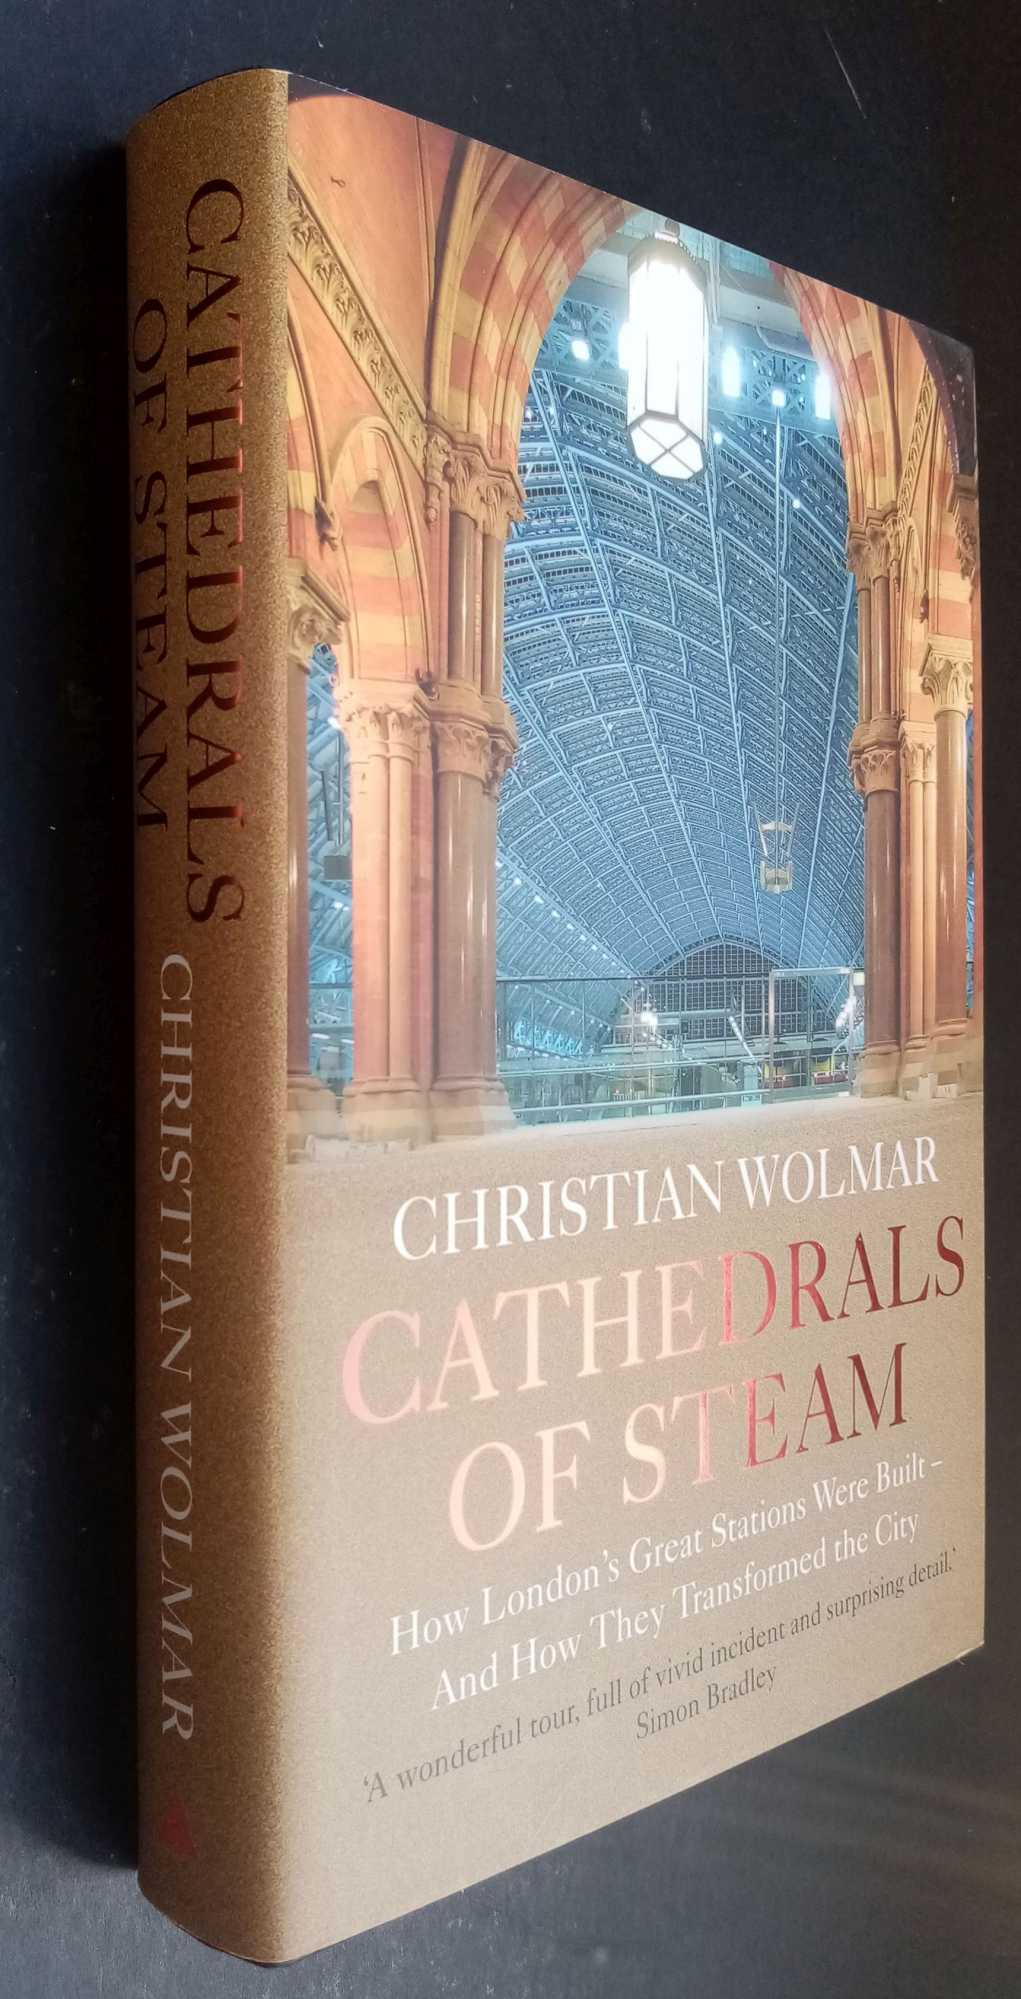 Christian Wolmar - Cathedrals of Steam: How Londons Great Stations Were Built  And How They Transformed the City